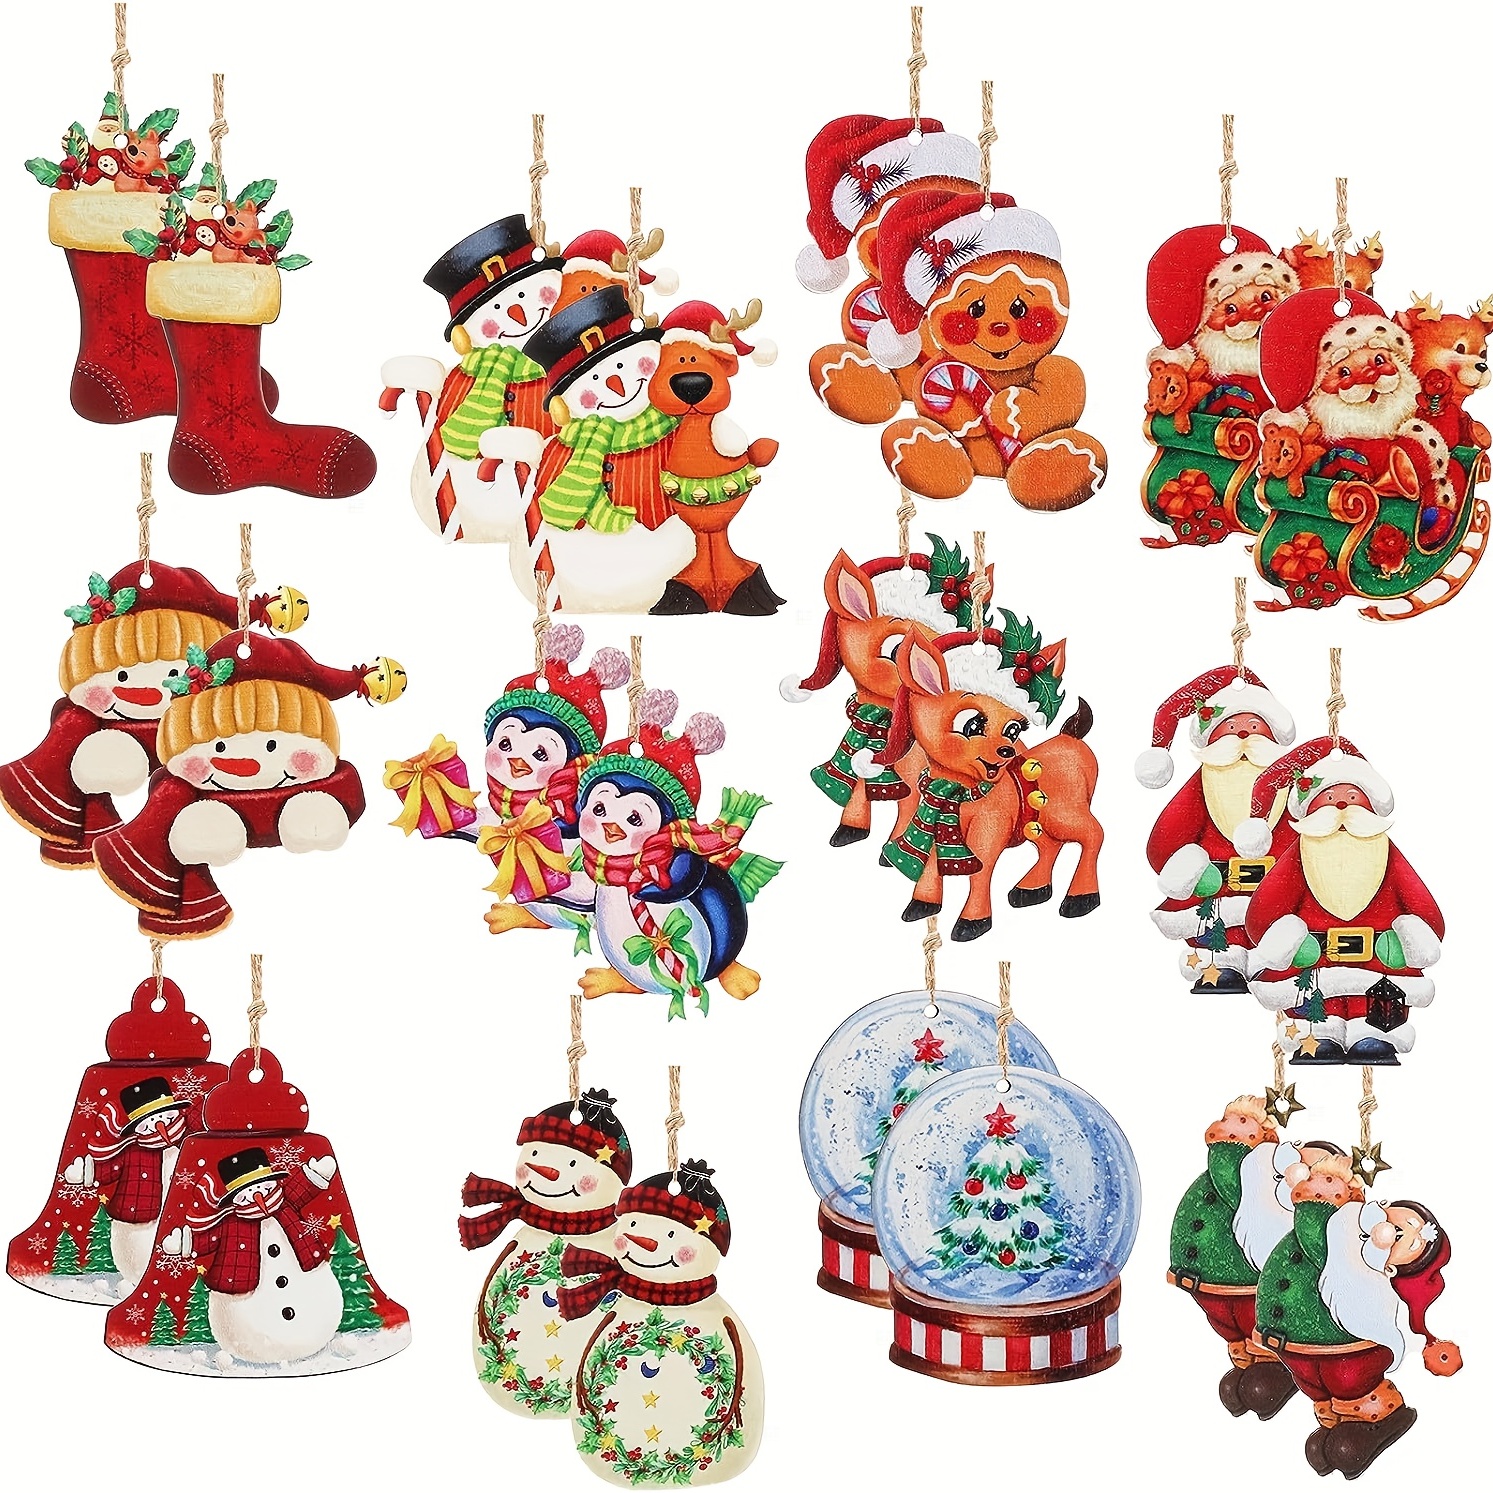 

24pcs Christmas Wooden Ornaments Christmas Wood Decor Farmhouse Style Hanging Wooden Ornaments Christmas Tree Vintage Santa Snowman Ornaments Christmas Hanging Crafts Pendants For Home Party